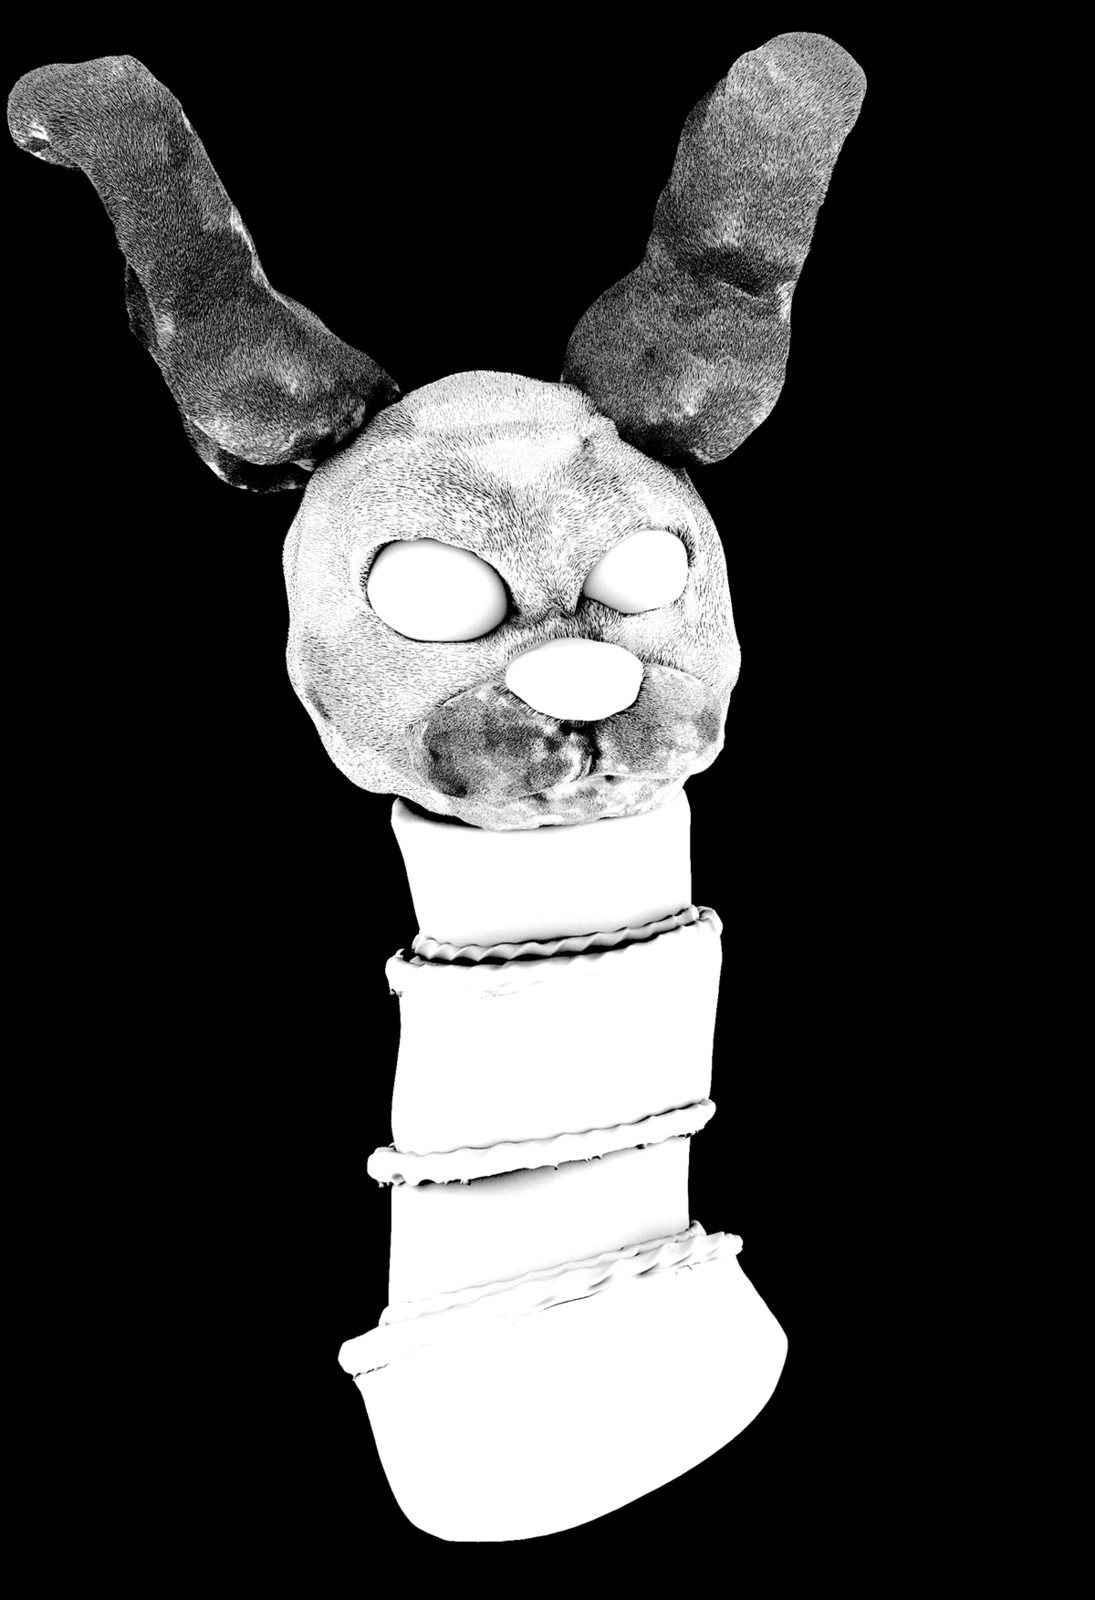 Ambient Occlusion pass